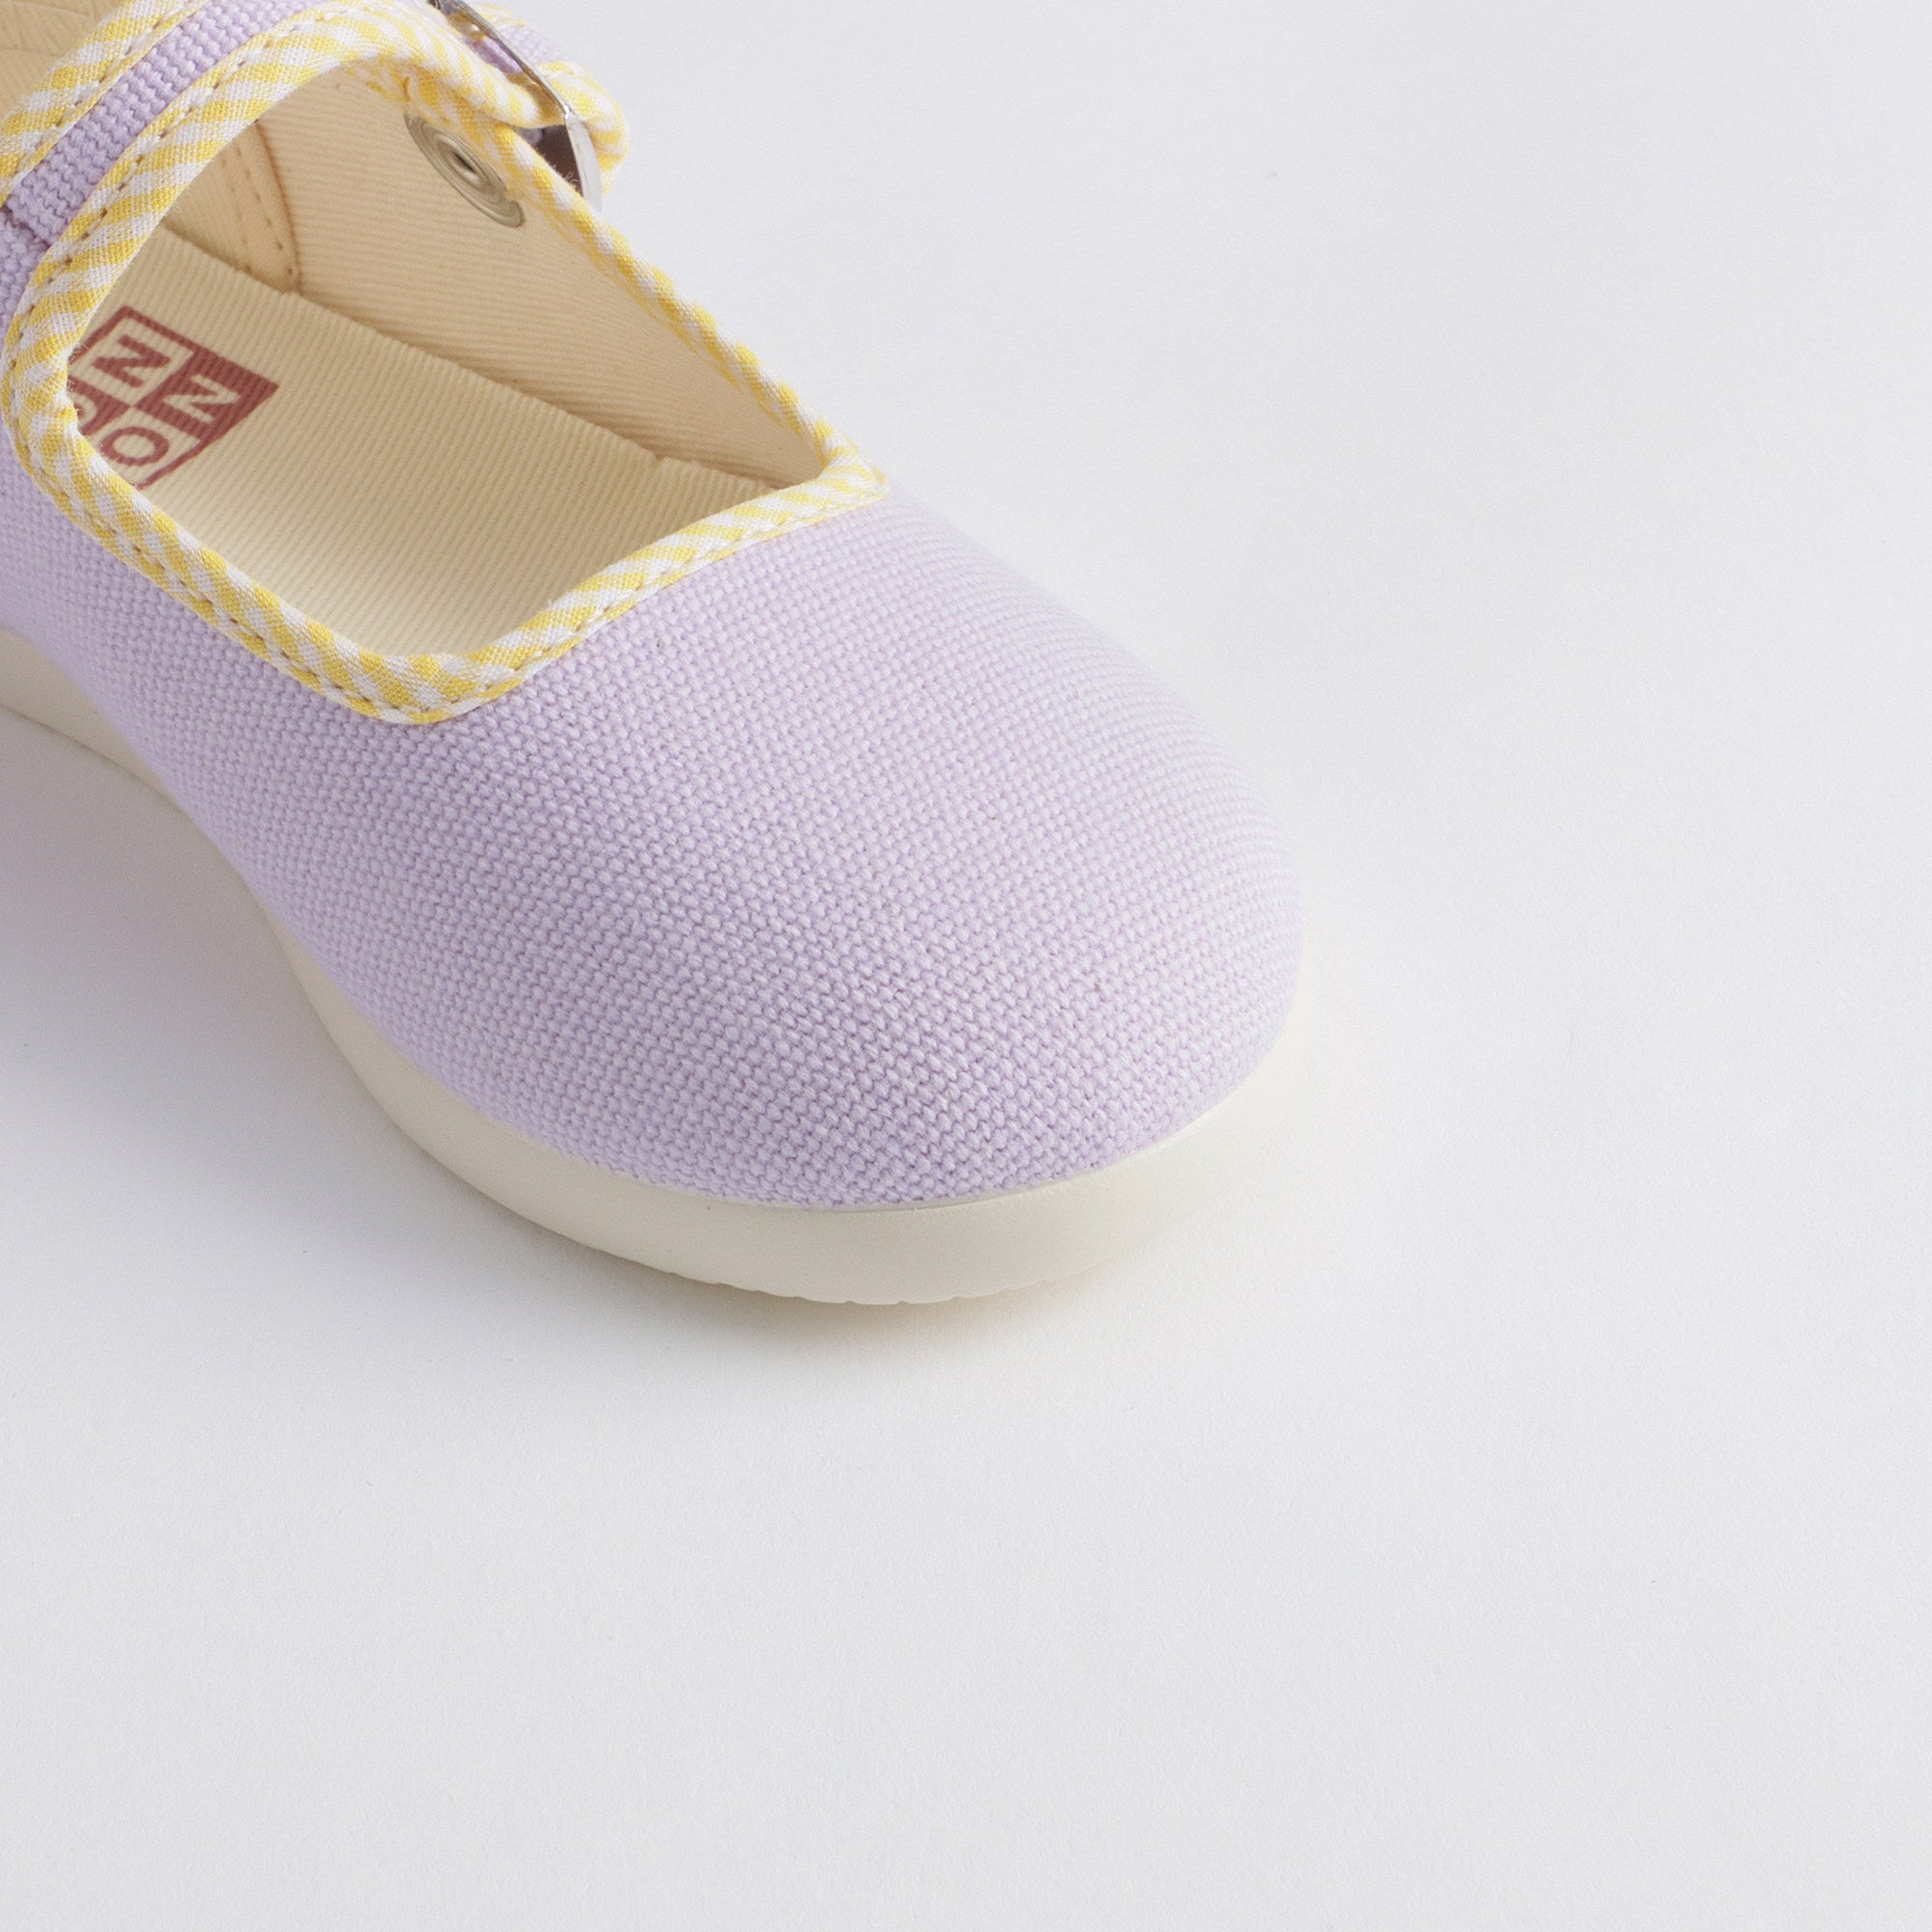 Girls Purple Buckled Cotton Shoes